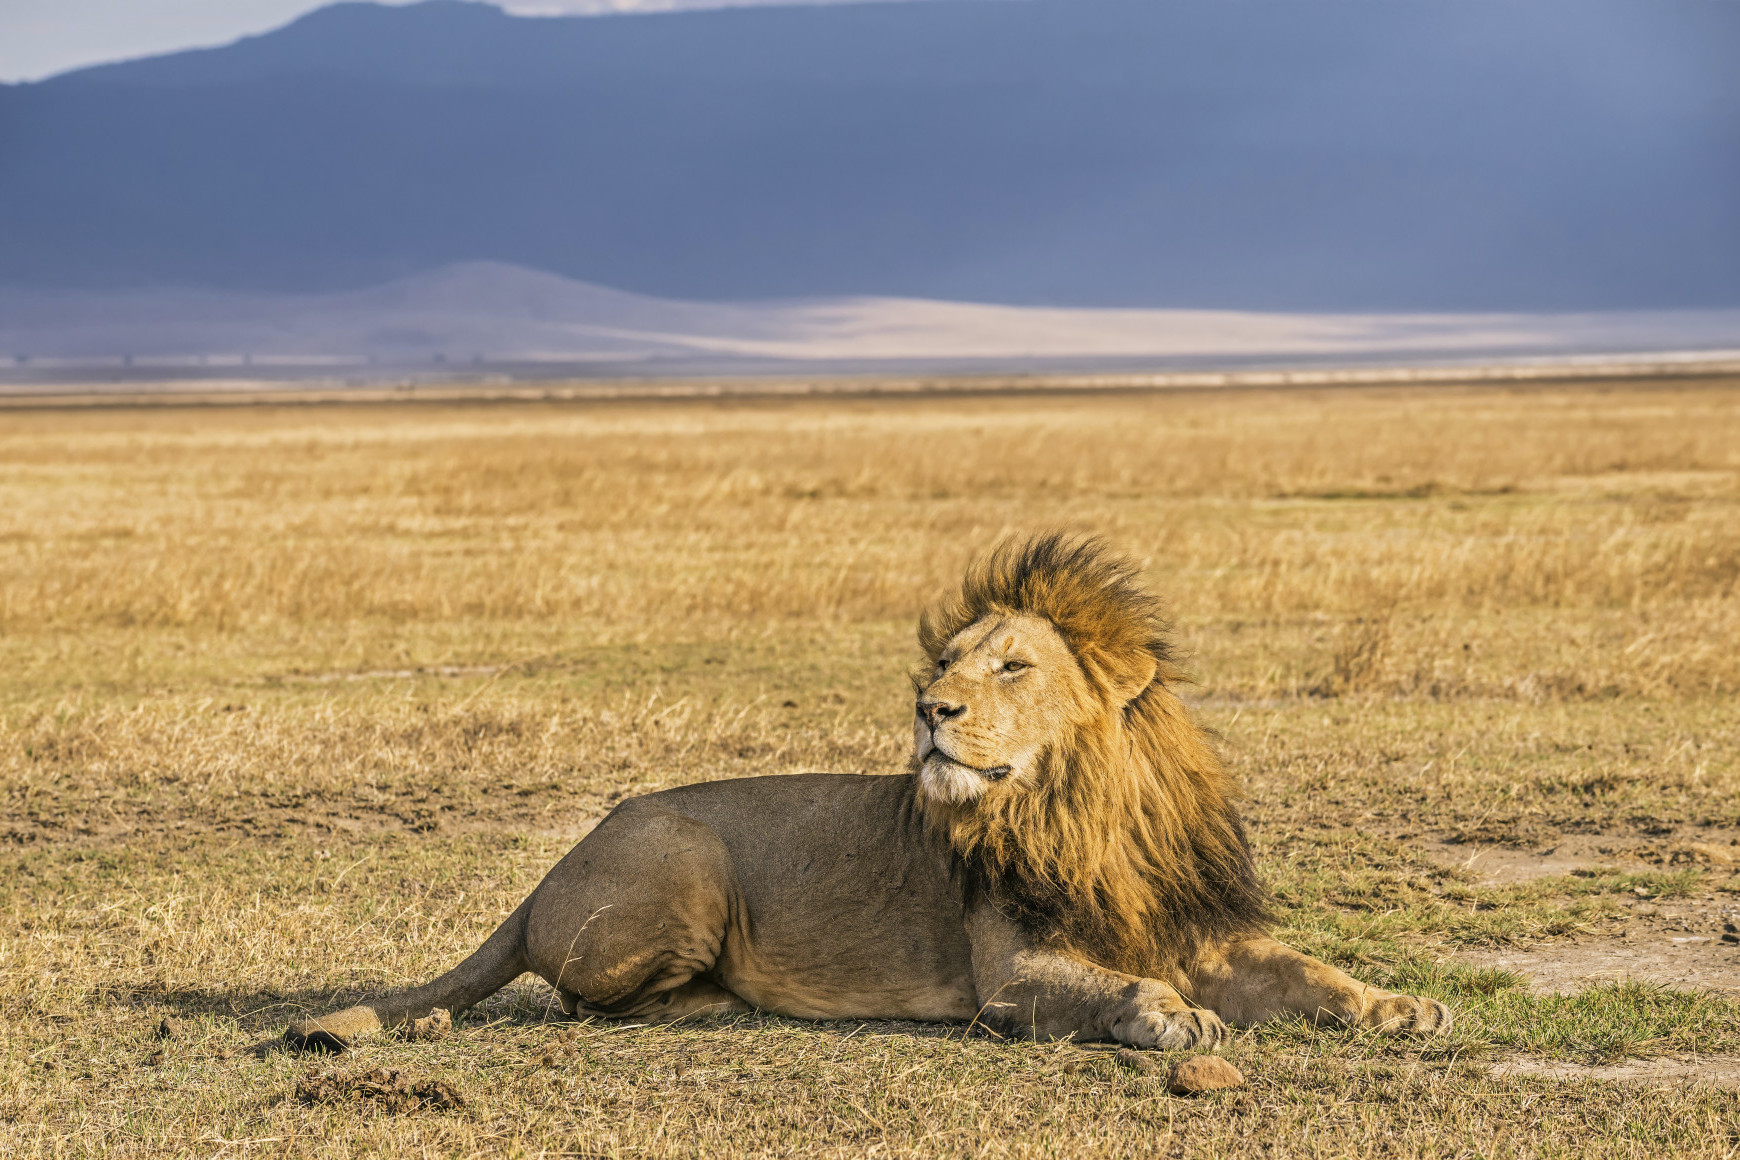 A wild lion resting in the Ngorongoro Crater National Park, Tanzania.